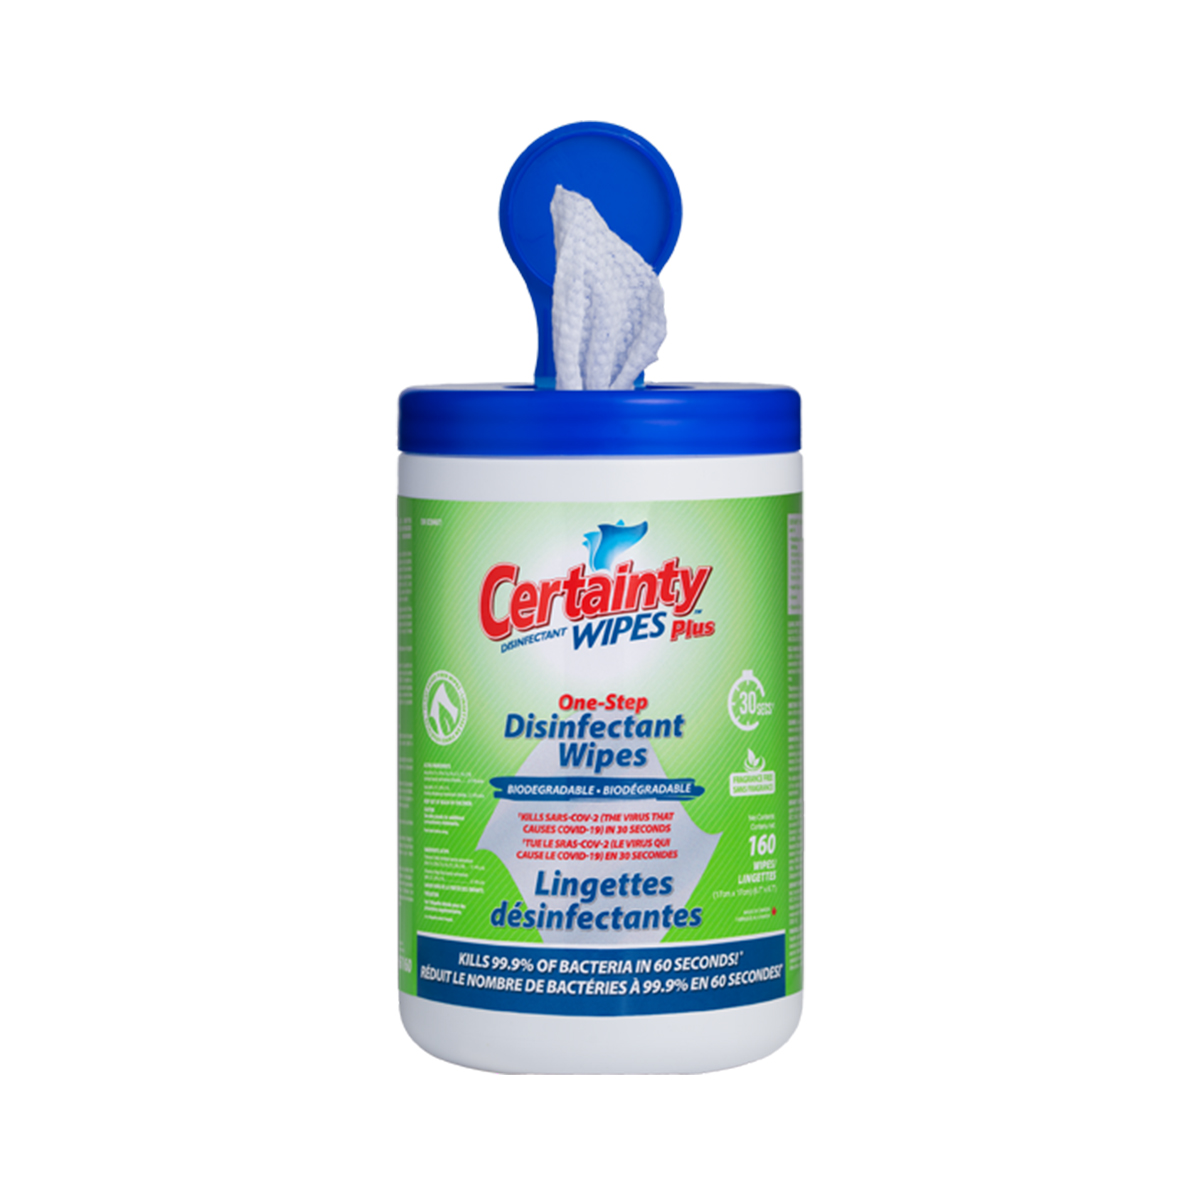 Certainty Biodegradable Plus Disinfectant Wipes